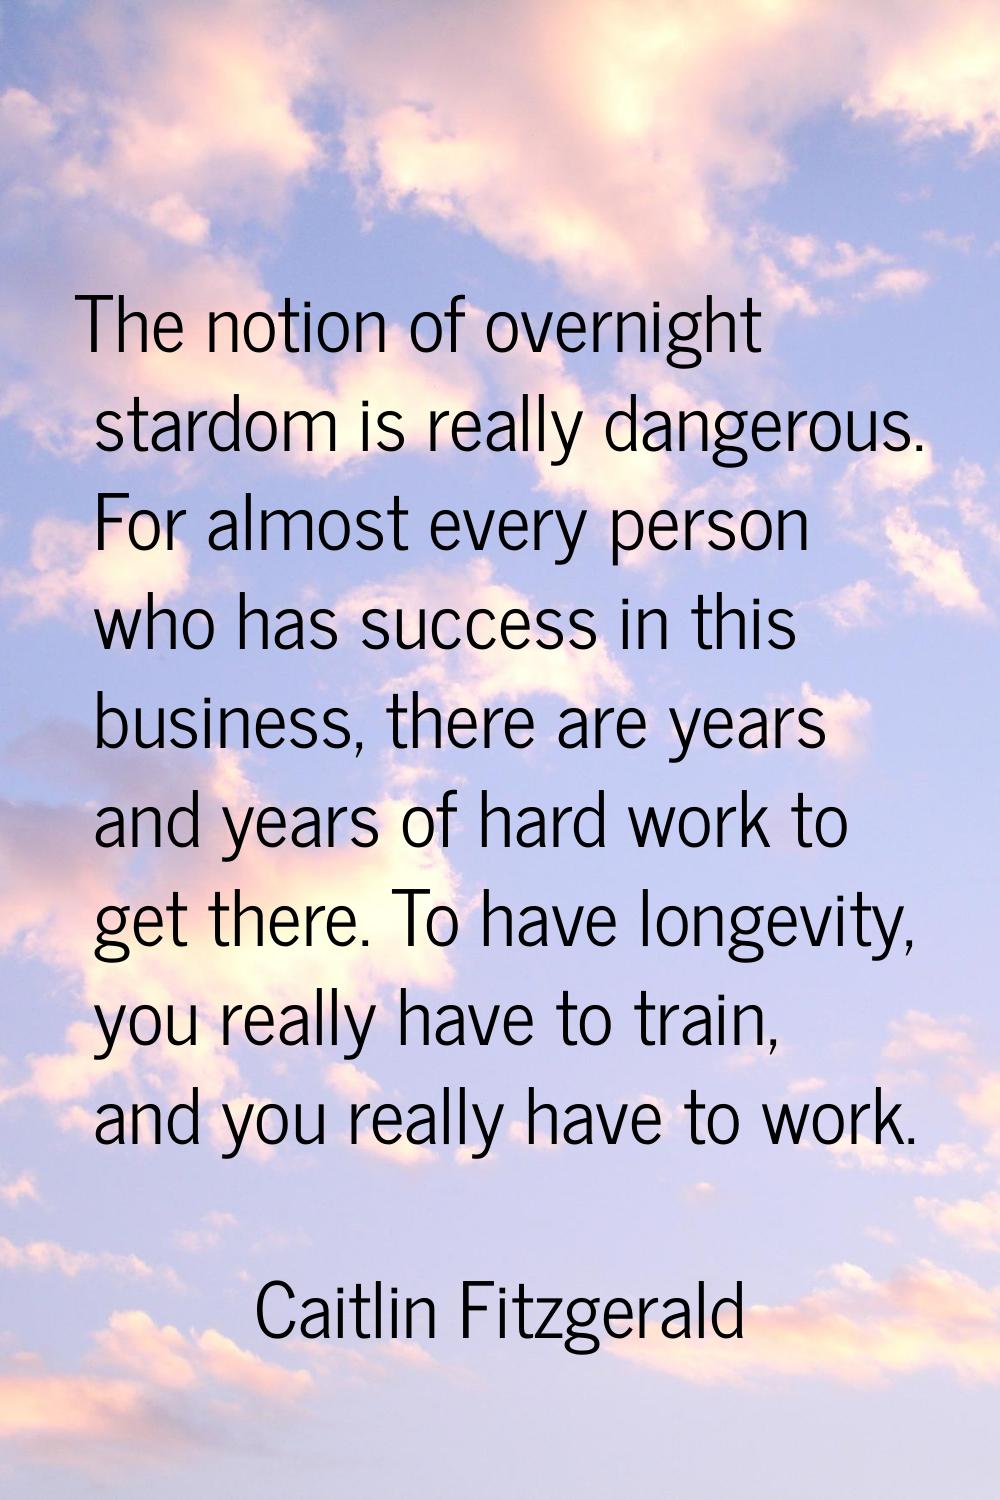 The notion of overnight stardom is really dangerous. For almost every person who has success in thi